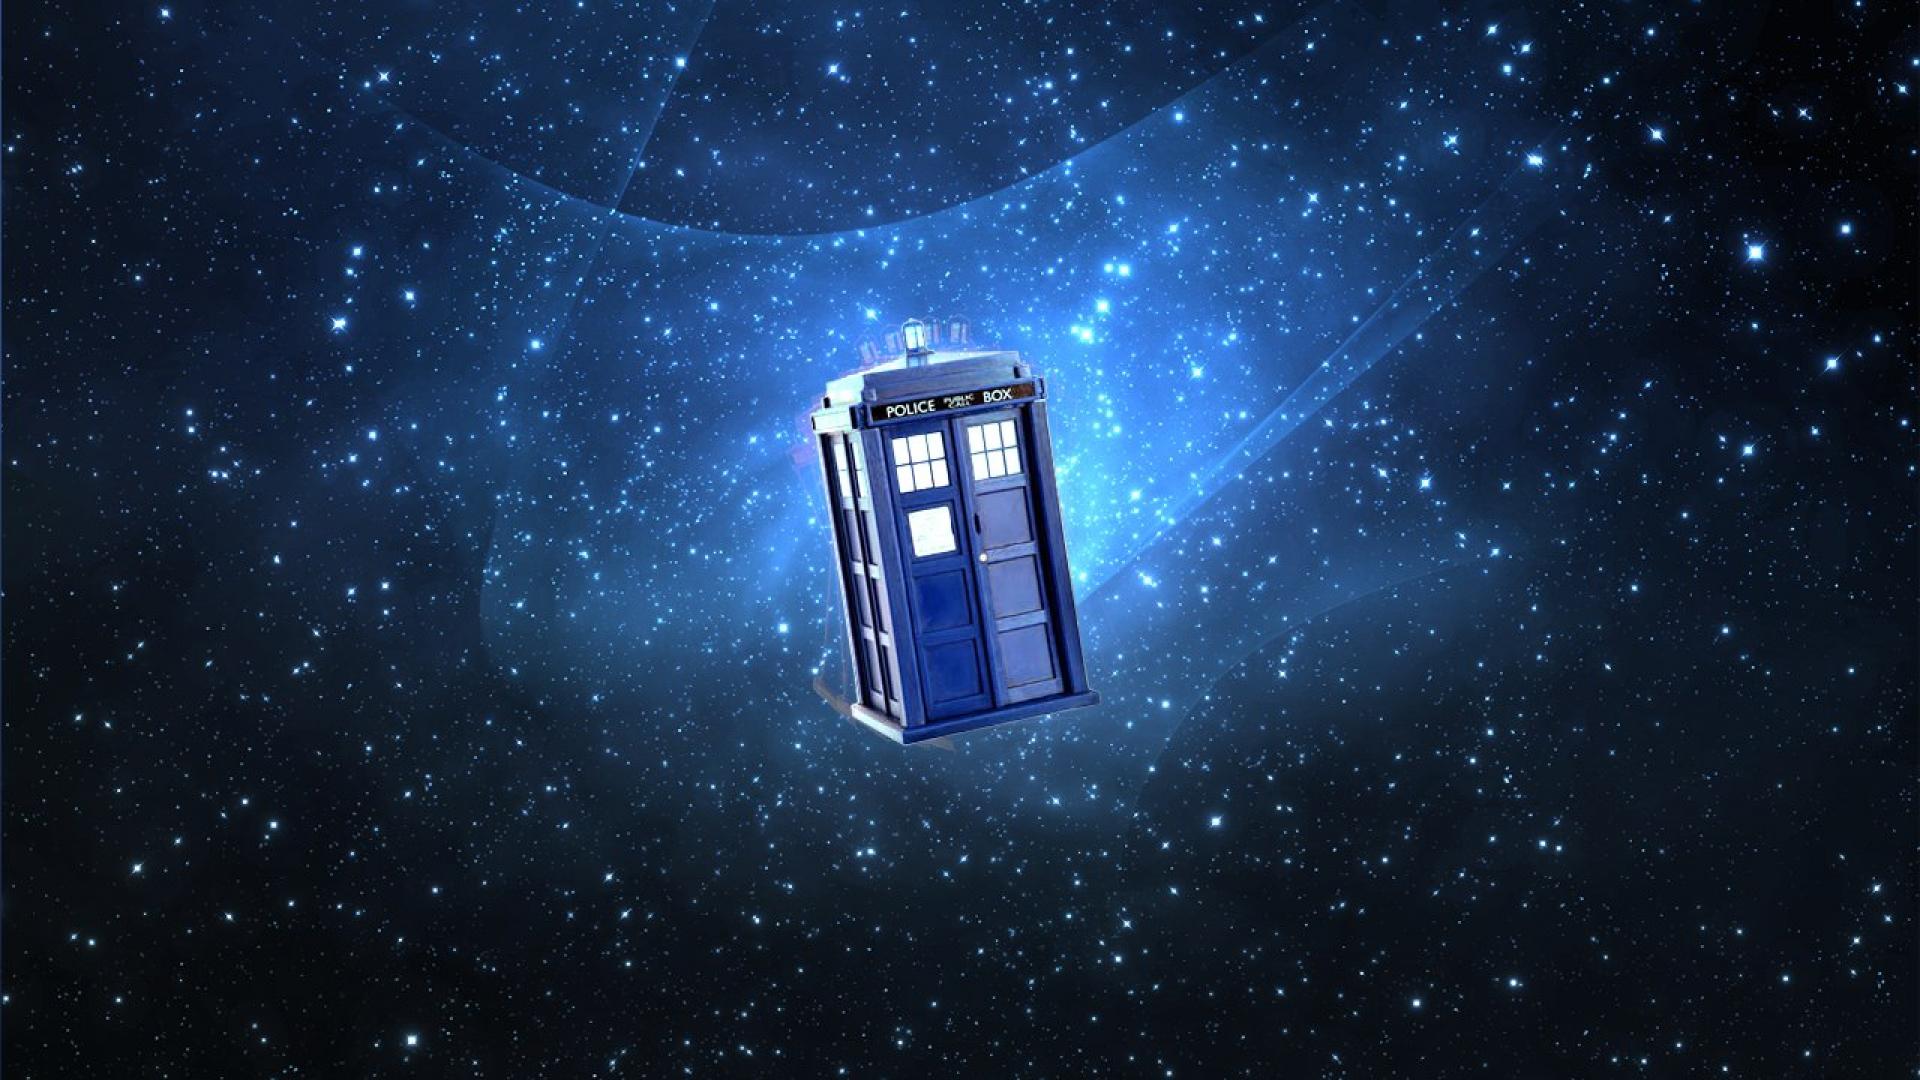 Dr Who iPad Background Wallpaper Details